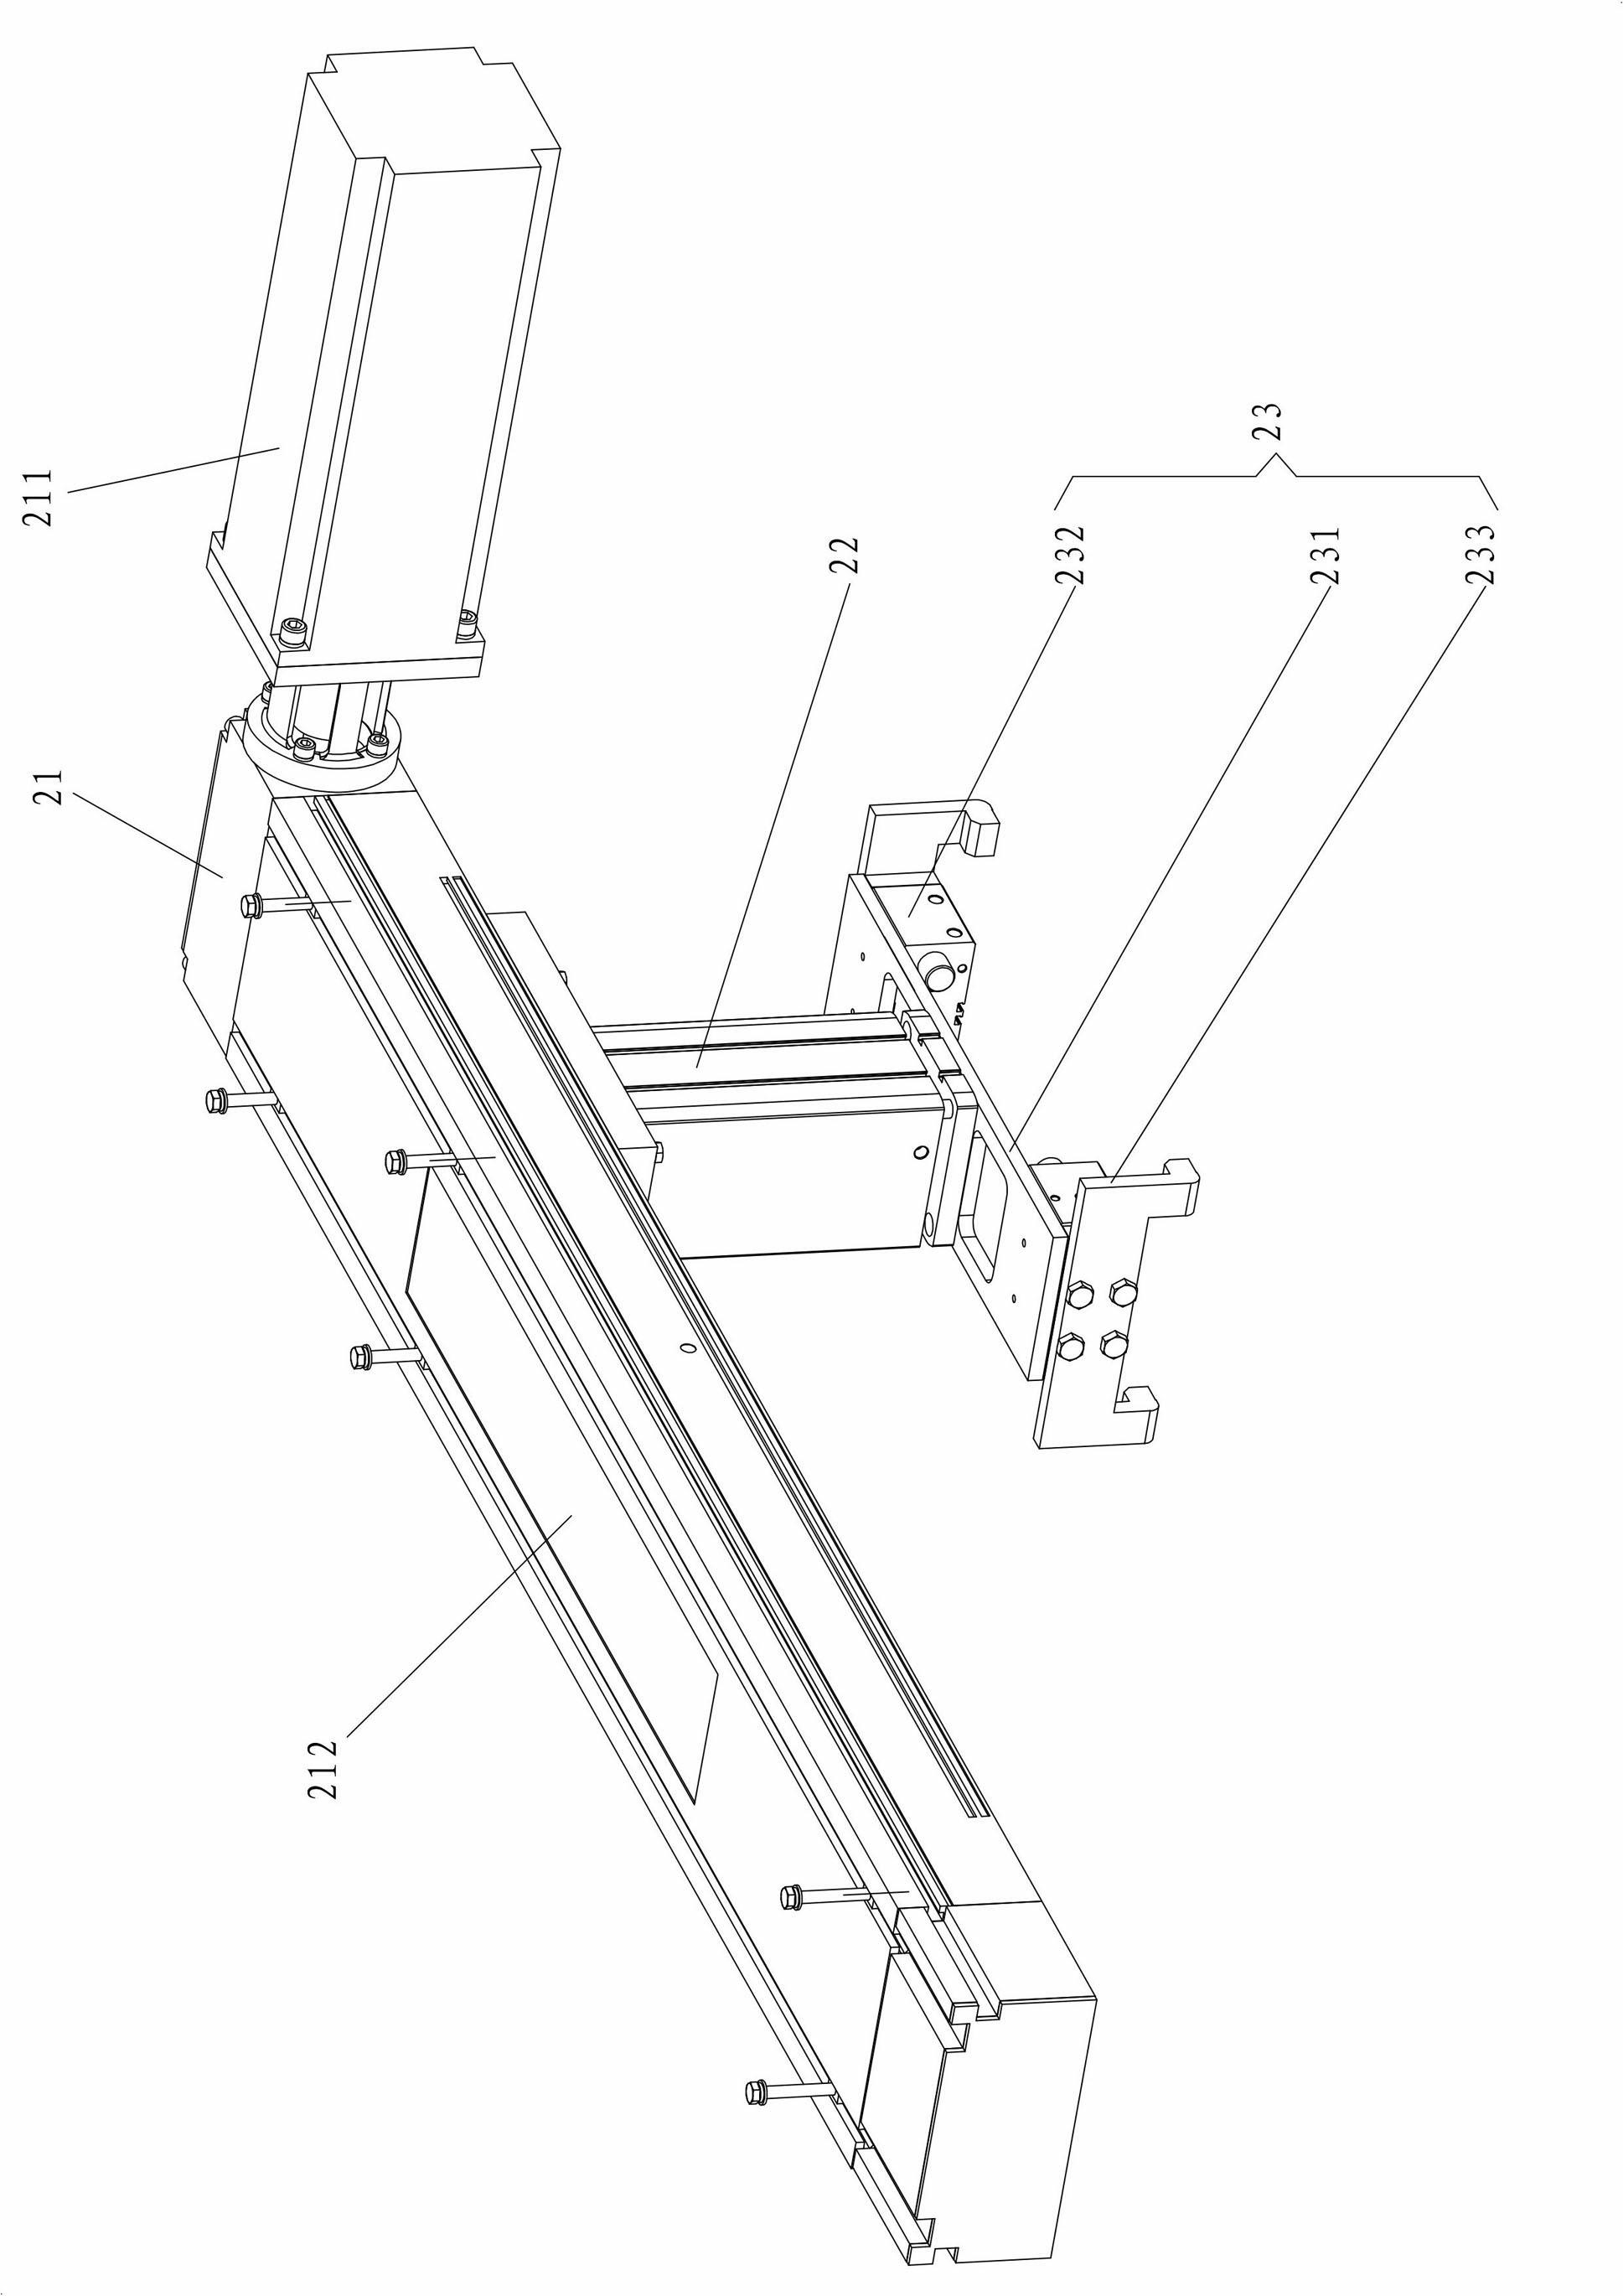 Automatic frame loading device for freeze-drying product line